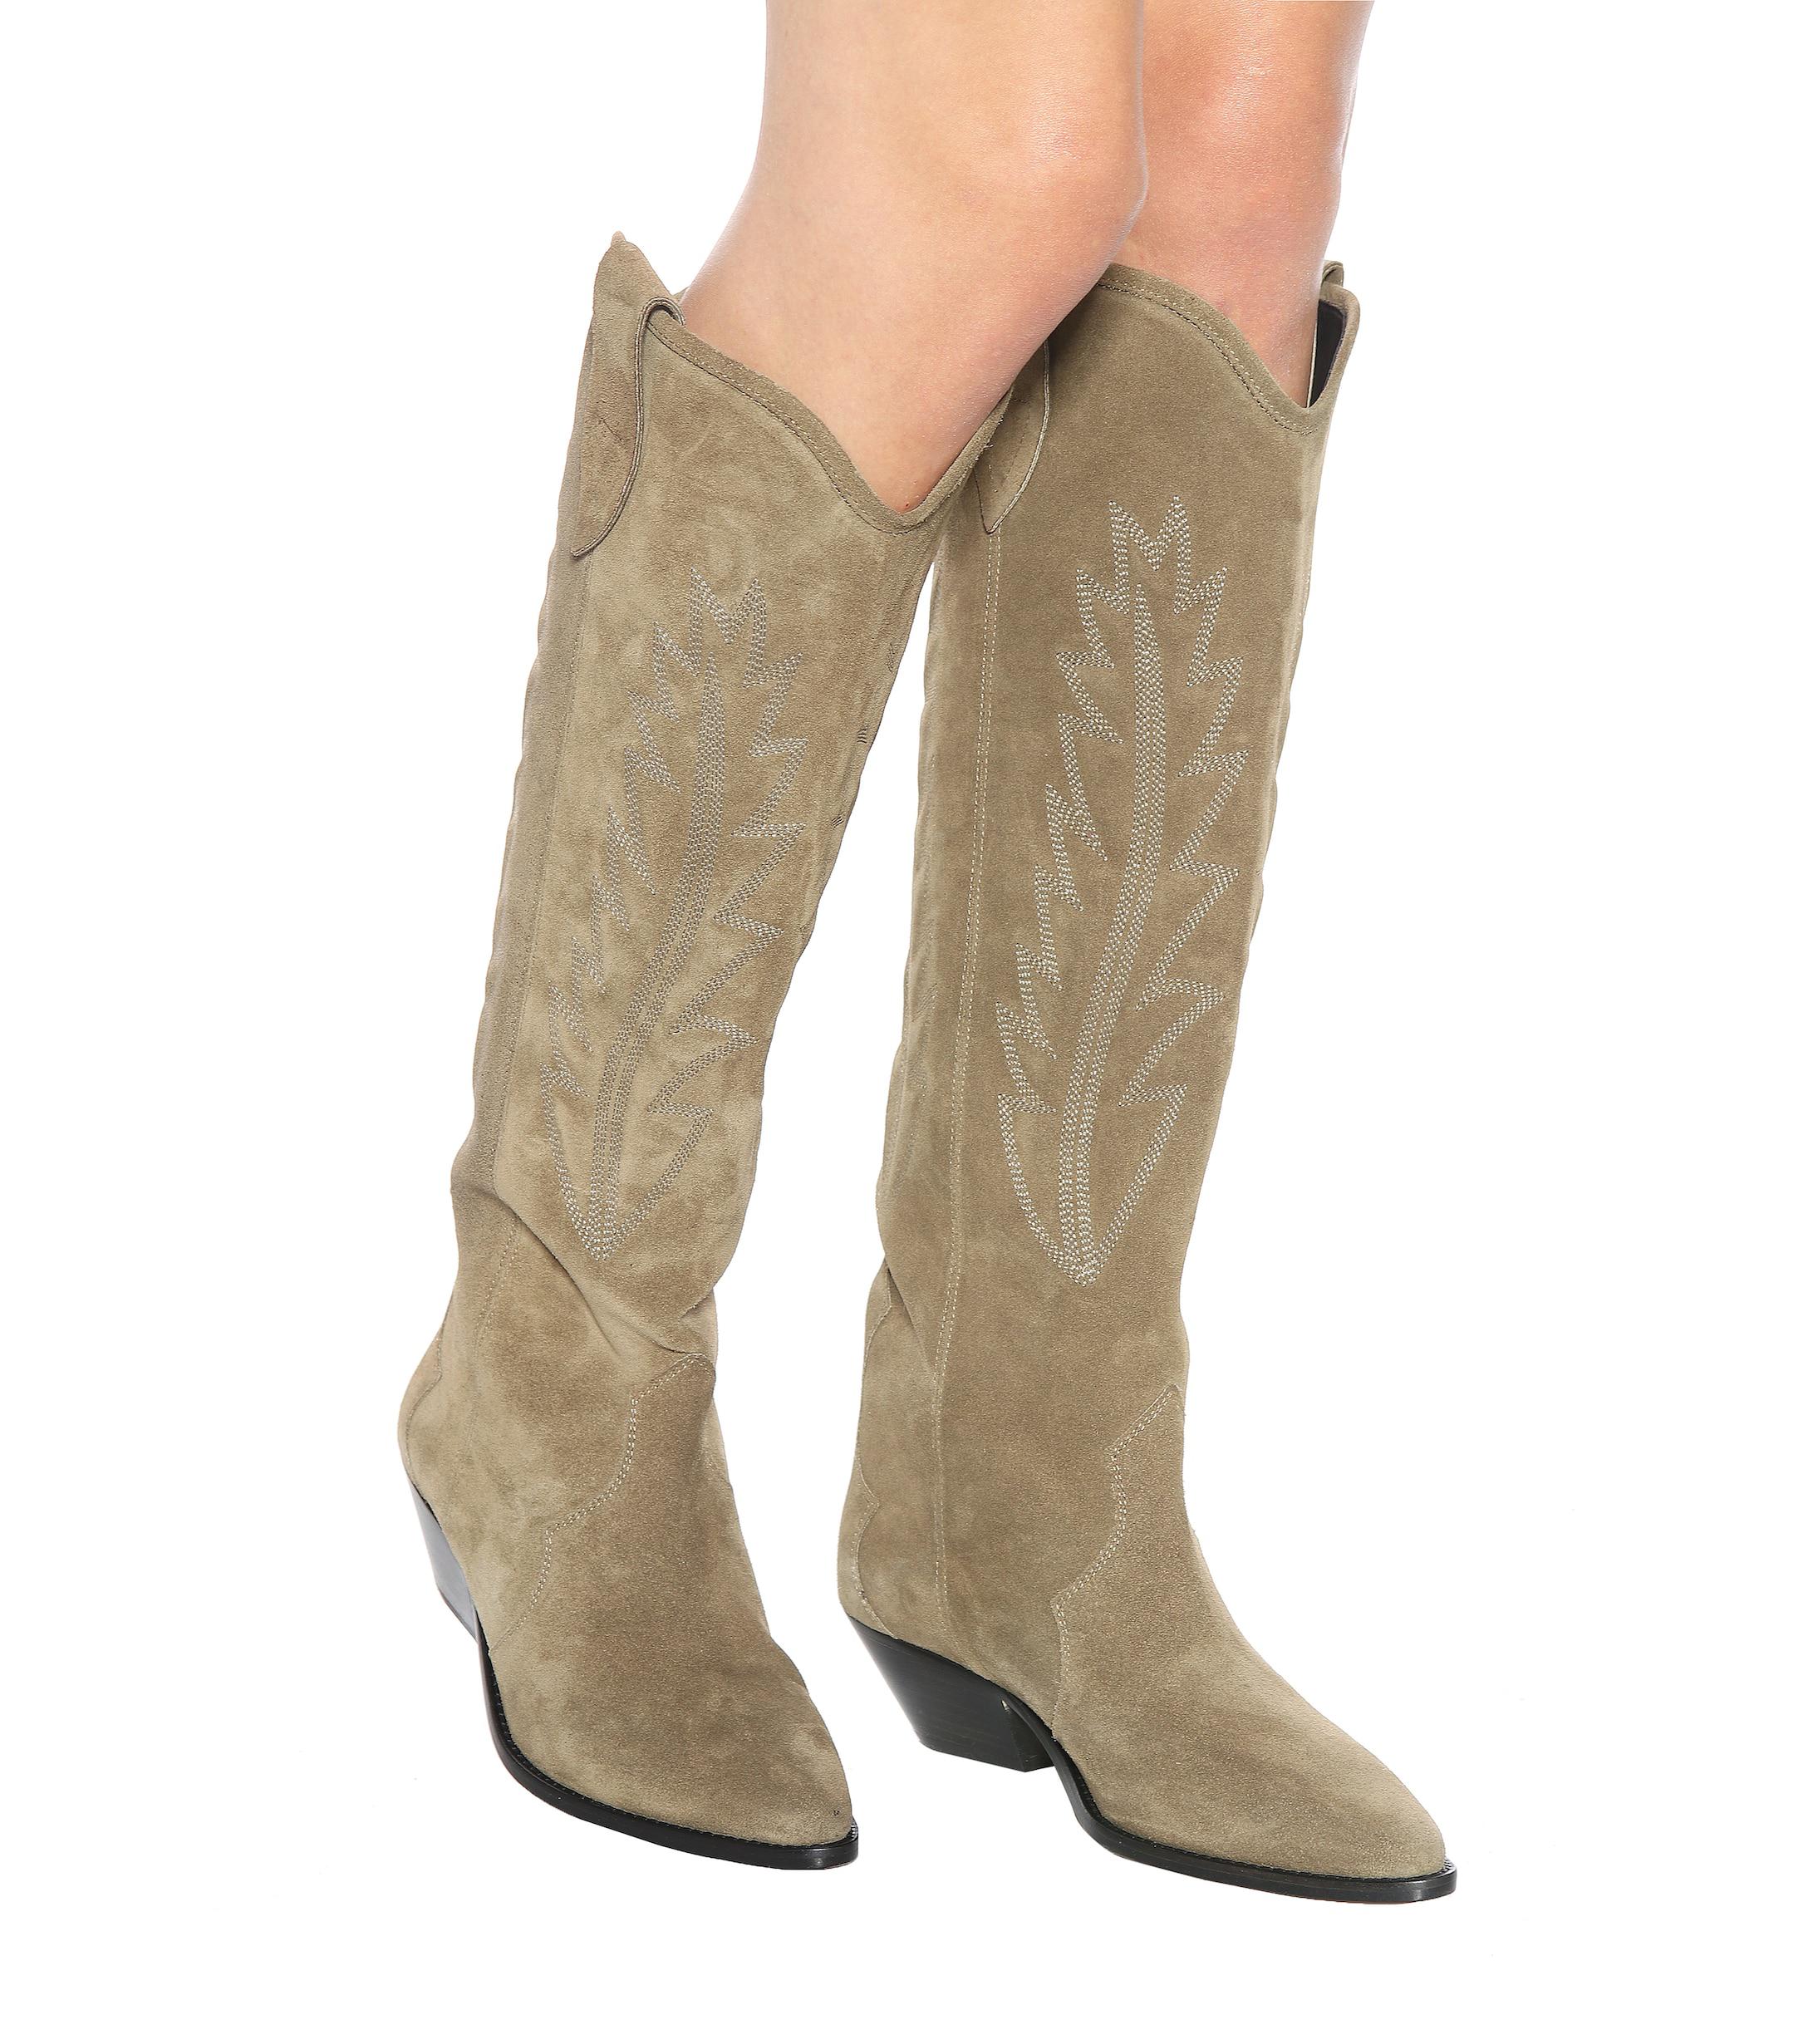 jage Bug grube Isabel Marant Denzy Suede Cowboy Boots in Natural | Lyst